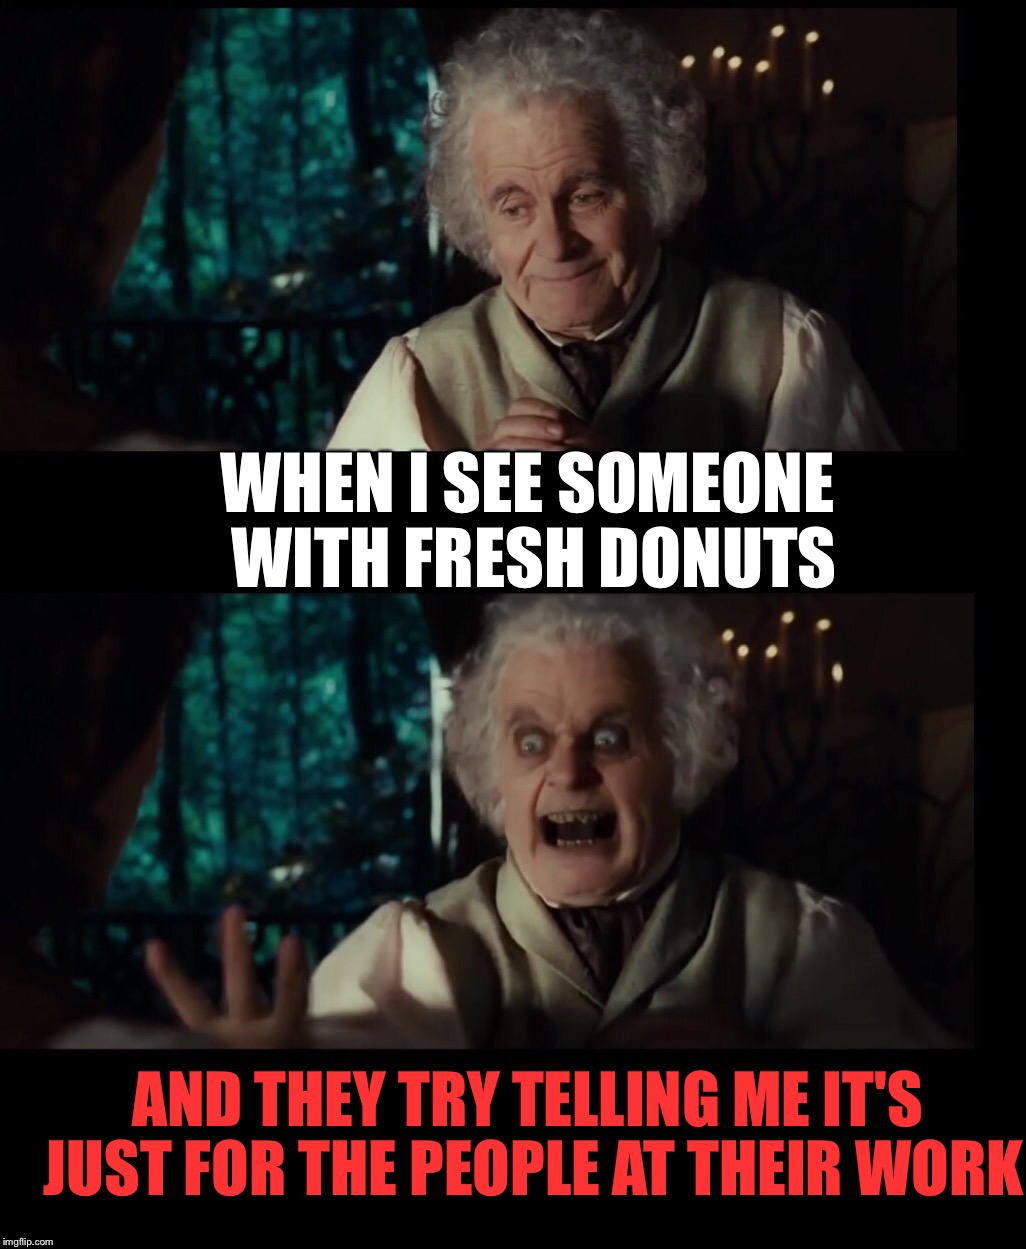 WHEN I SEE SOMEONE WITH FRESH DONUTS; AND THEY TRY TELLING ME IT'S JUST FOR THE PEOPLE AT THEIR WORK | image tagged in memes,donuts,lotr,my precious,fresh,lord of the rings | made w/ Imgflip meme maker